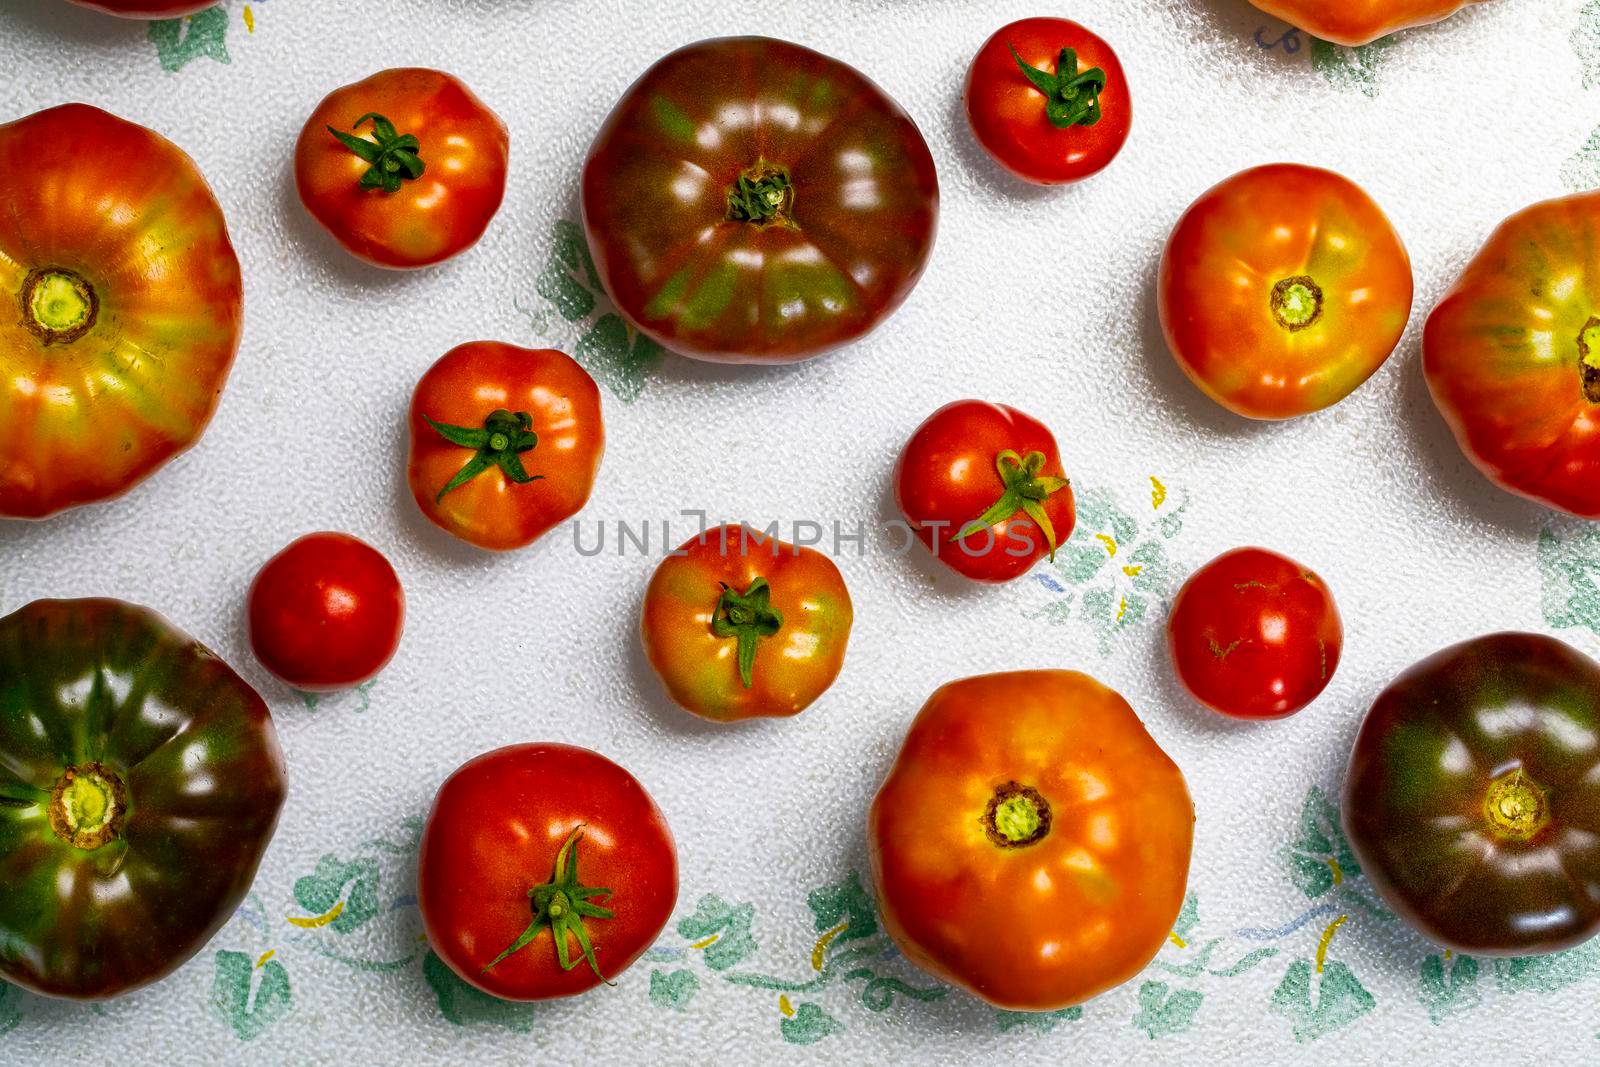 Collection of Ripe Heirloom Tomatoes by CharlieFloyd